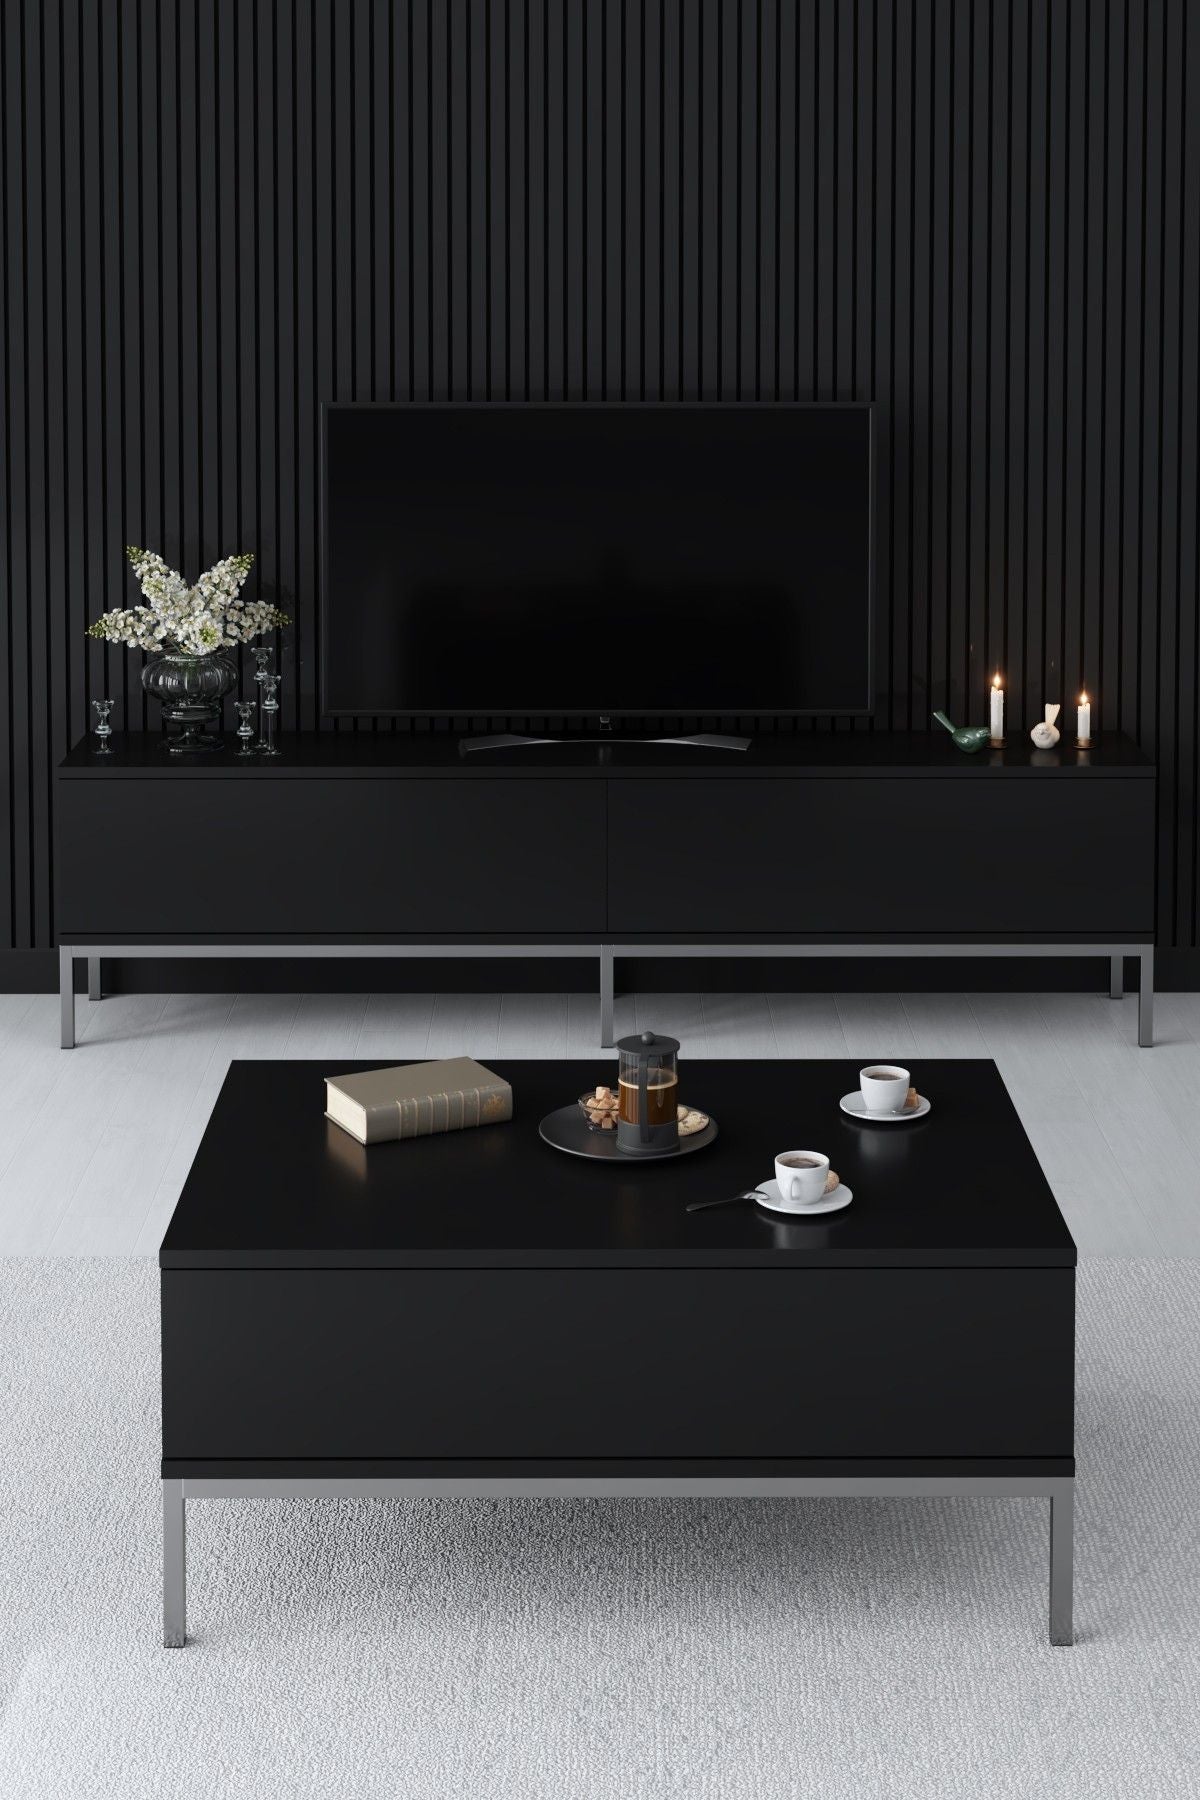 Lord - Black, Silver - Coffee Table